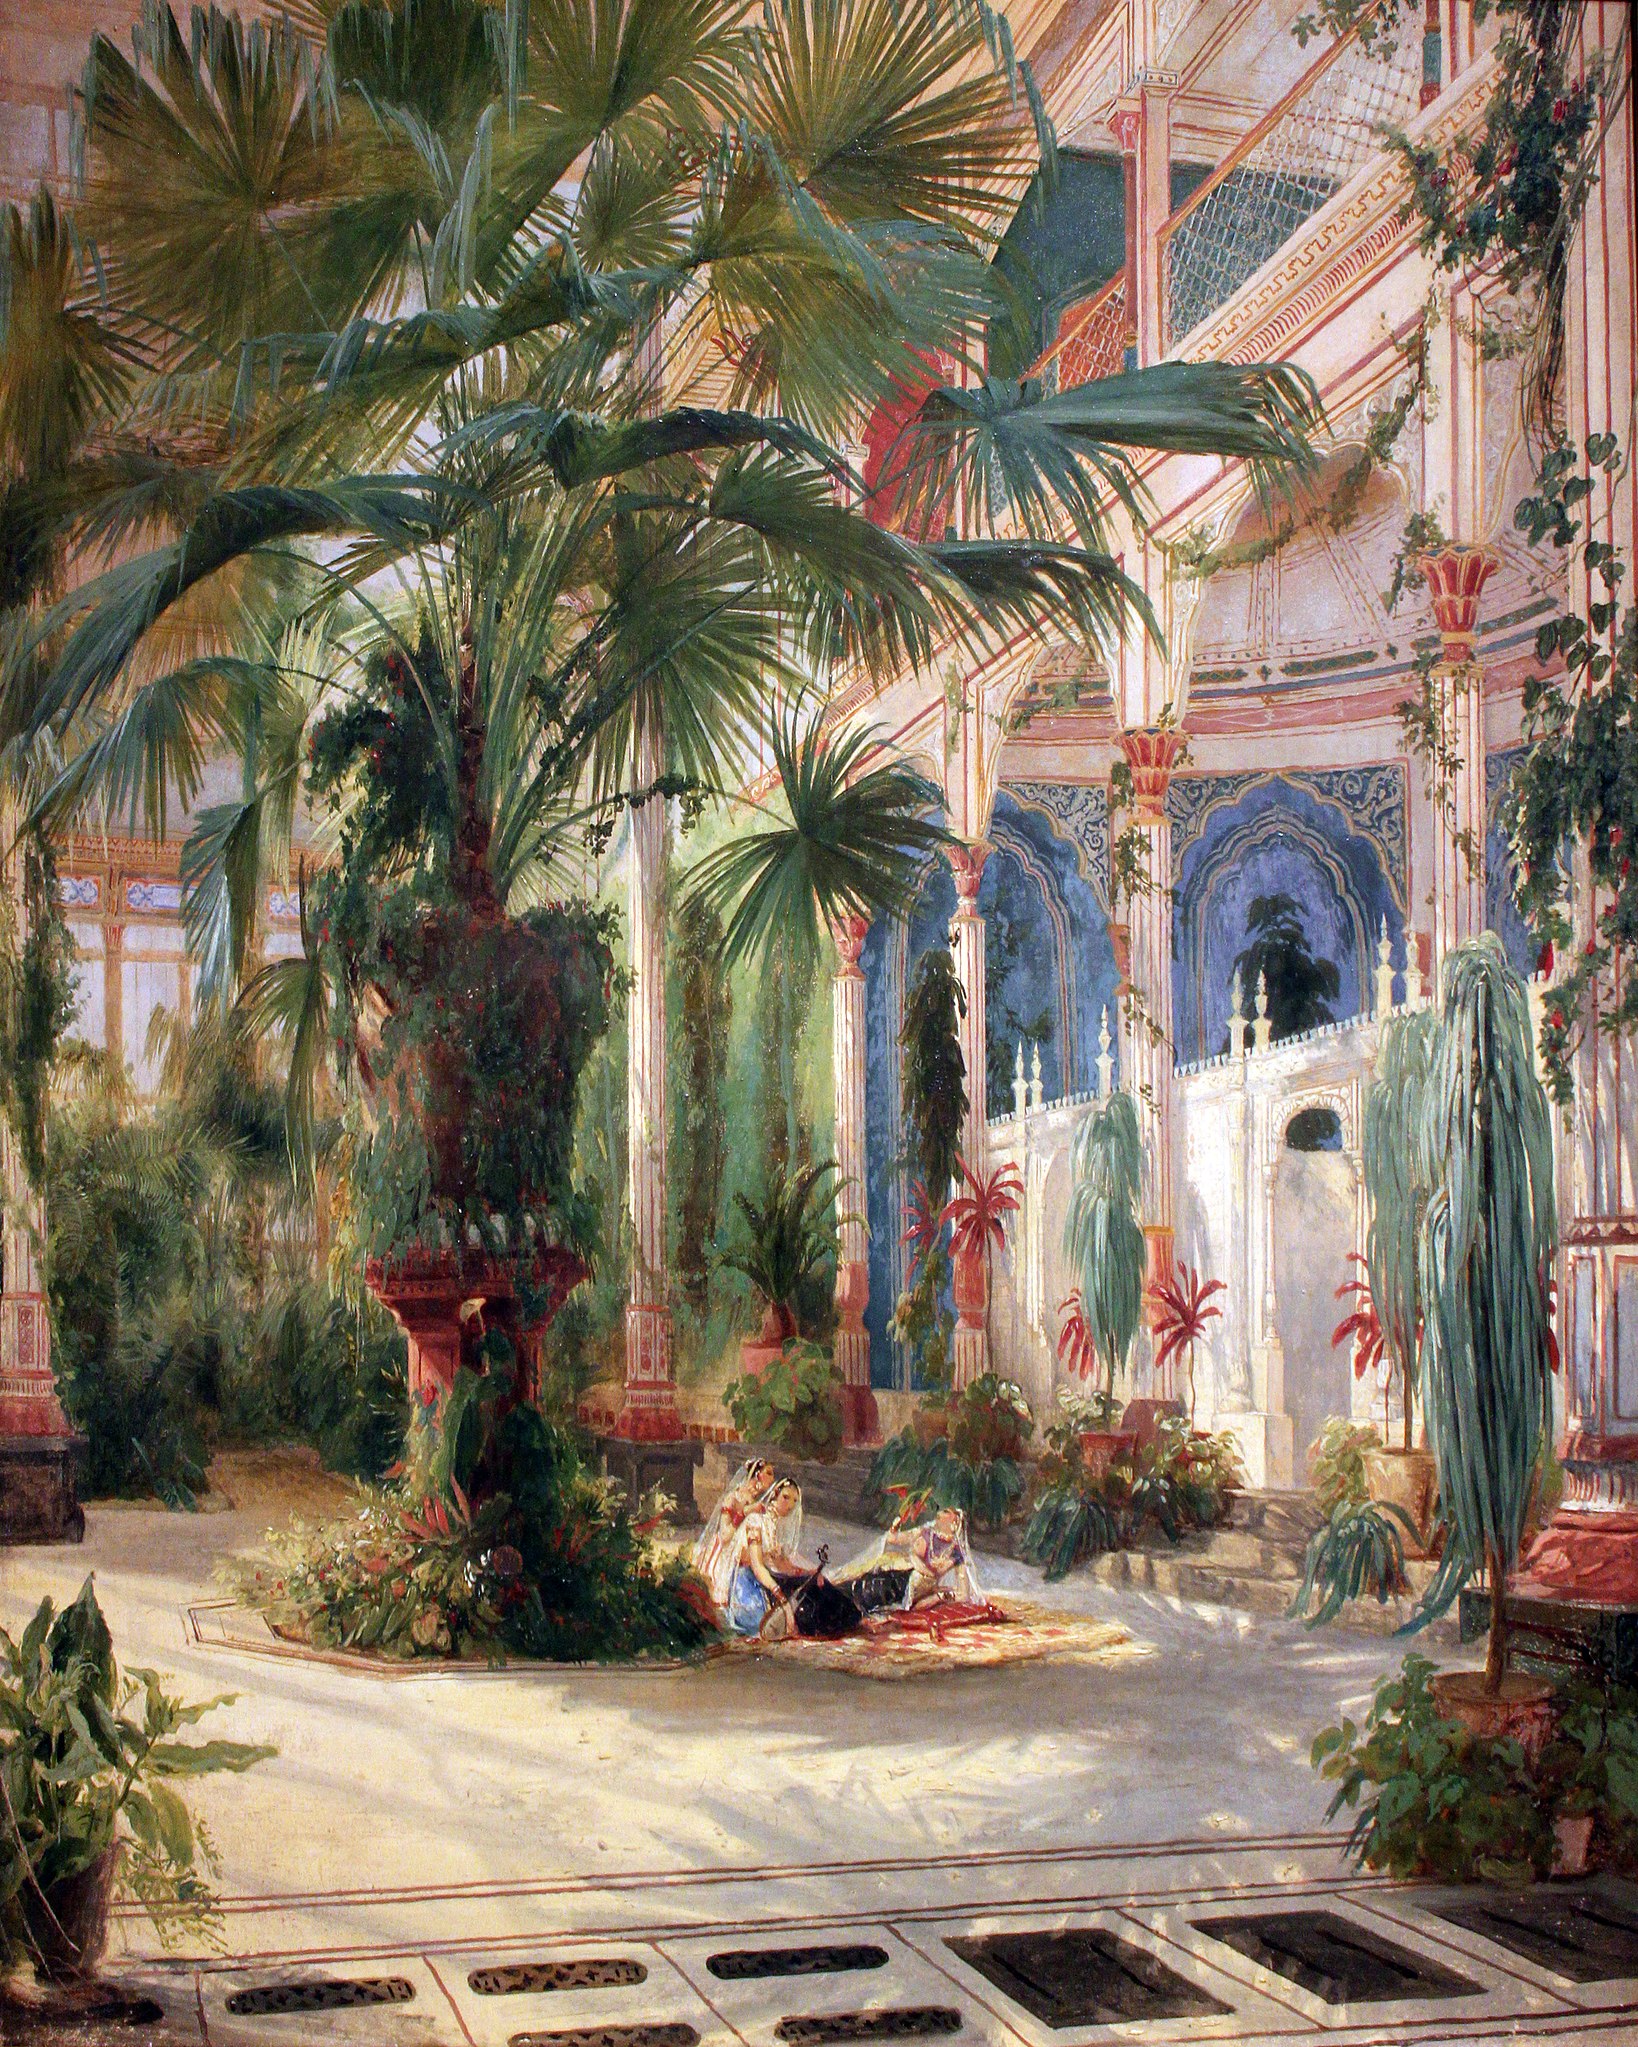 The Interior of the Palm House by Carl Blechen - 1832/1833 - 56 x 64 cm Alte Nationalgalerie